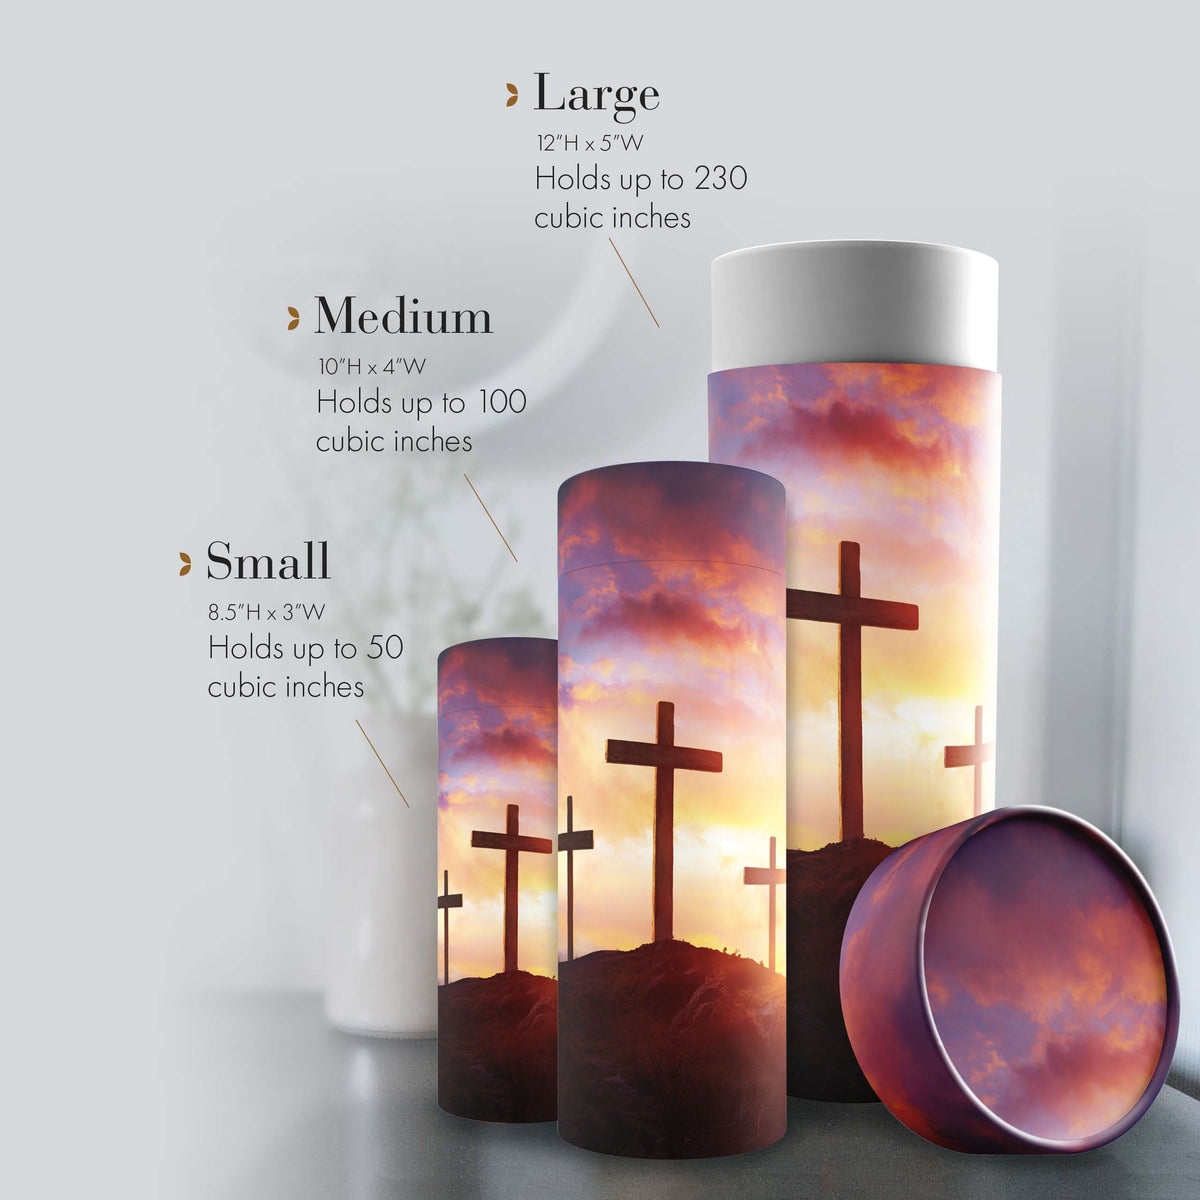 Commemorative Cremation Urns Three Crosses - Biodegradable &amp; Eco Friendly Burial or Scattering Urn / Tube